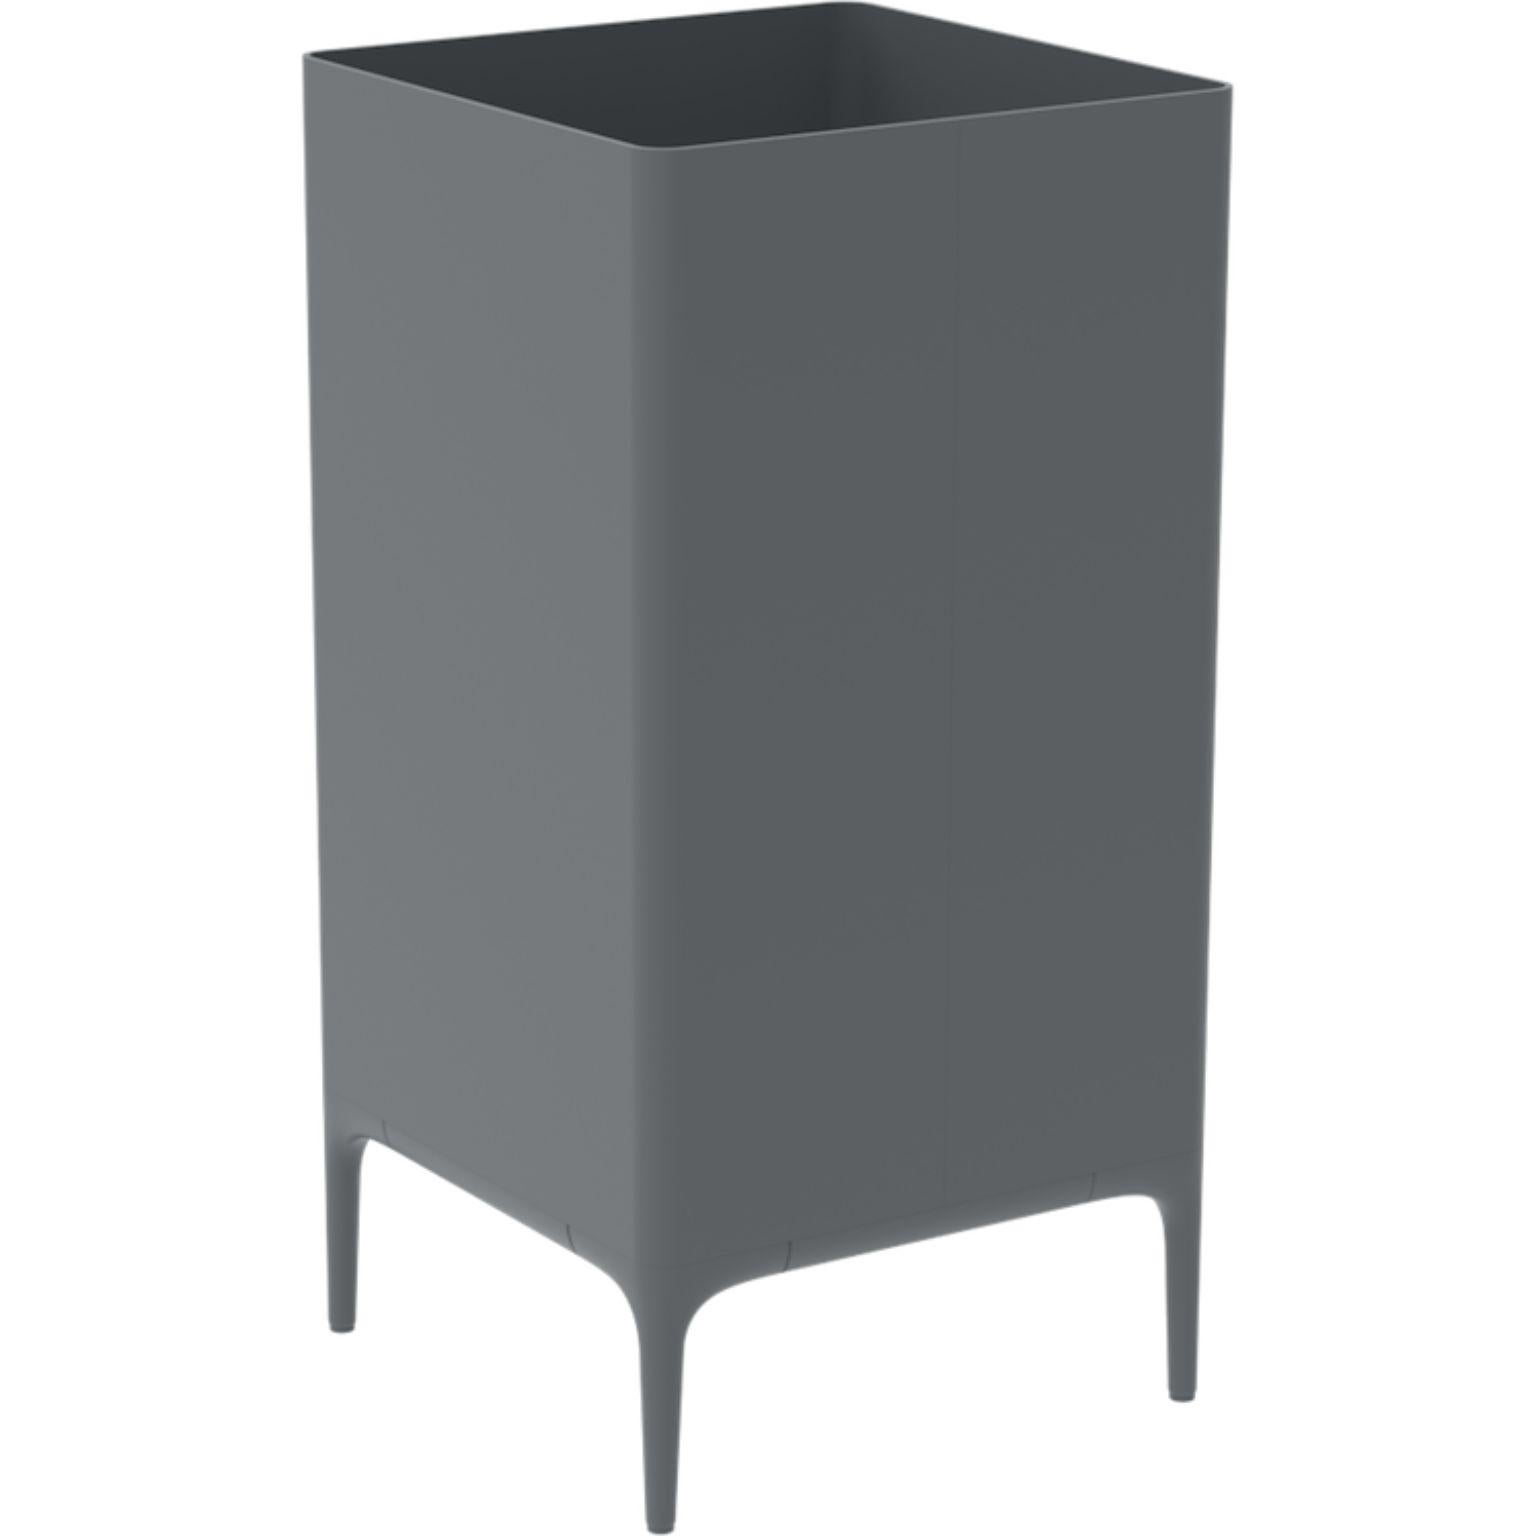 Xaloc grey 95 pot by MOWEE
Dimensions: D45 x W45 x H90 cm
Material: aluminium
Weight: 12 kg
Also available in different colours and finishes. 

 Xaloc synthesizes the lines of interior furniture to extrapolate to the exterior, creating an